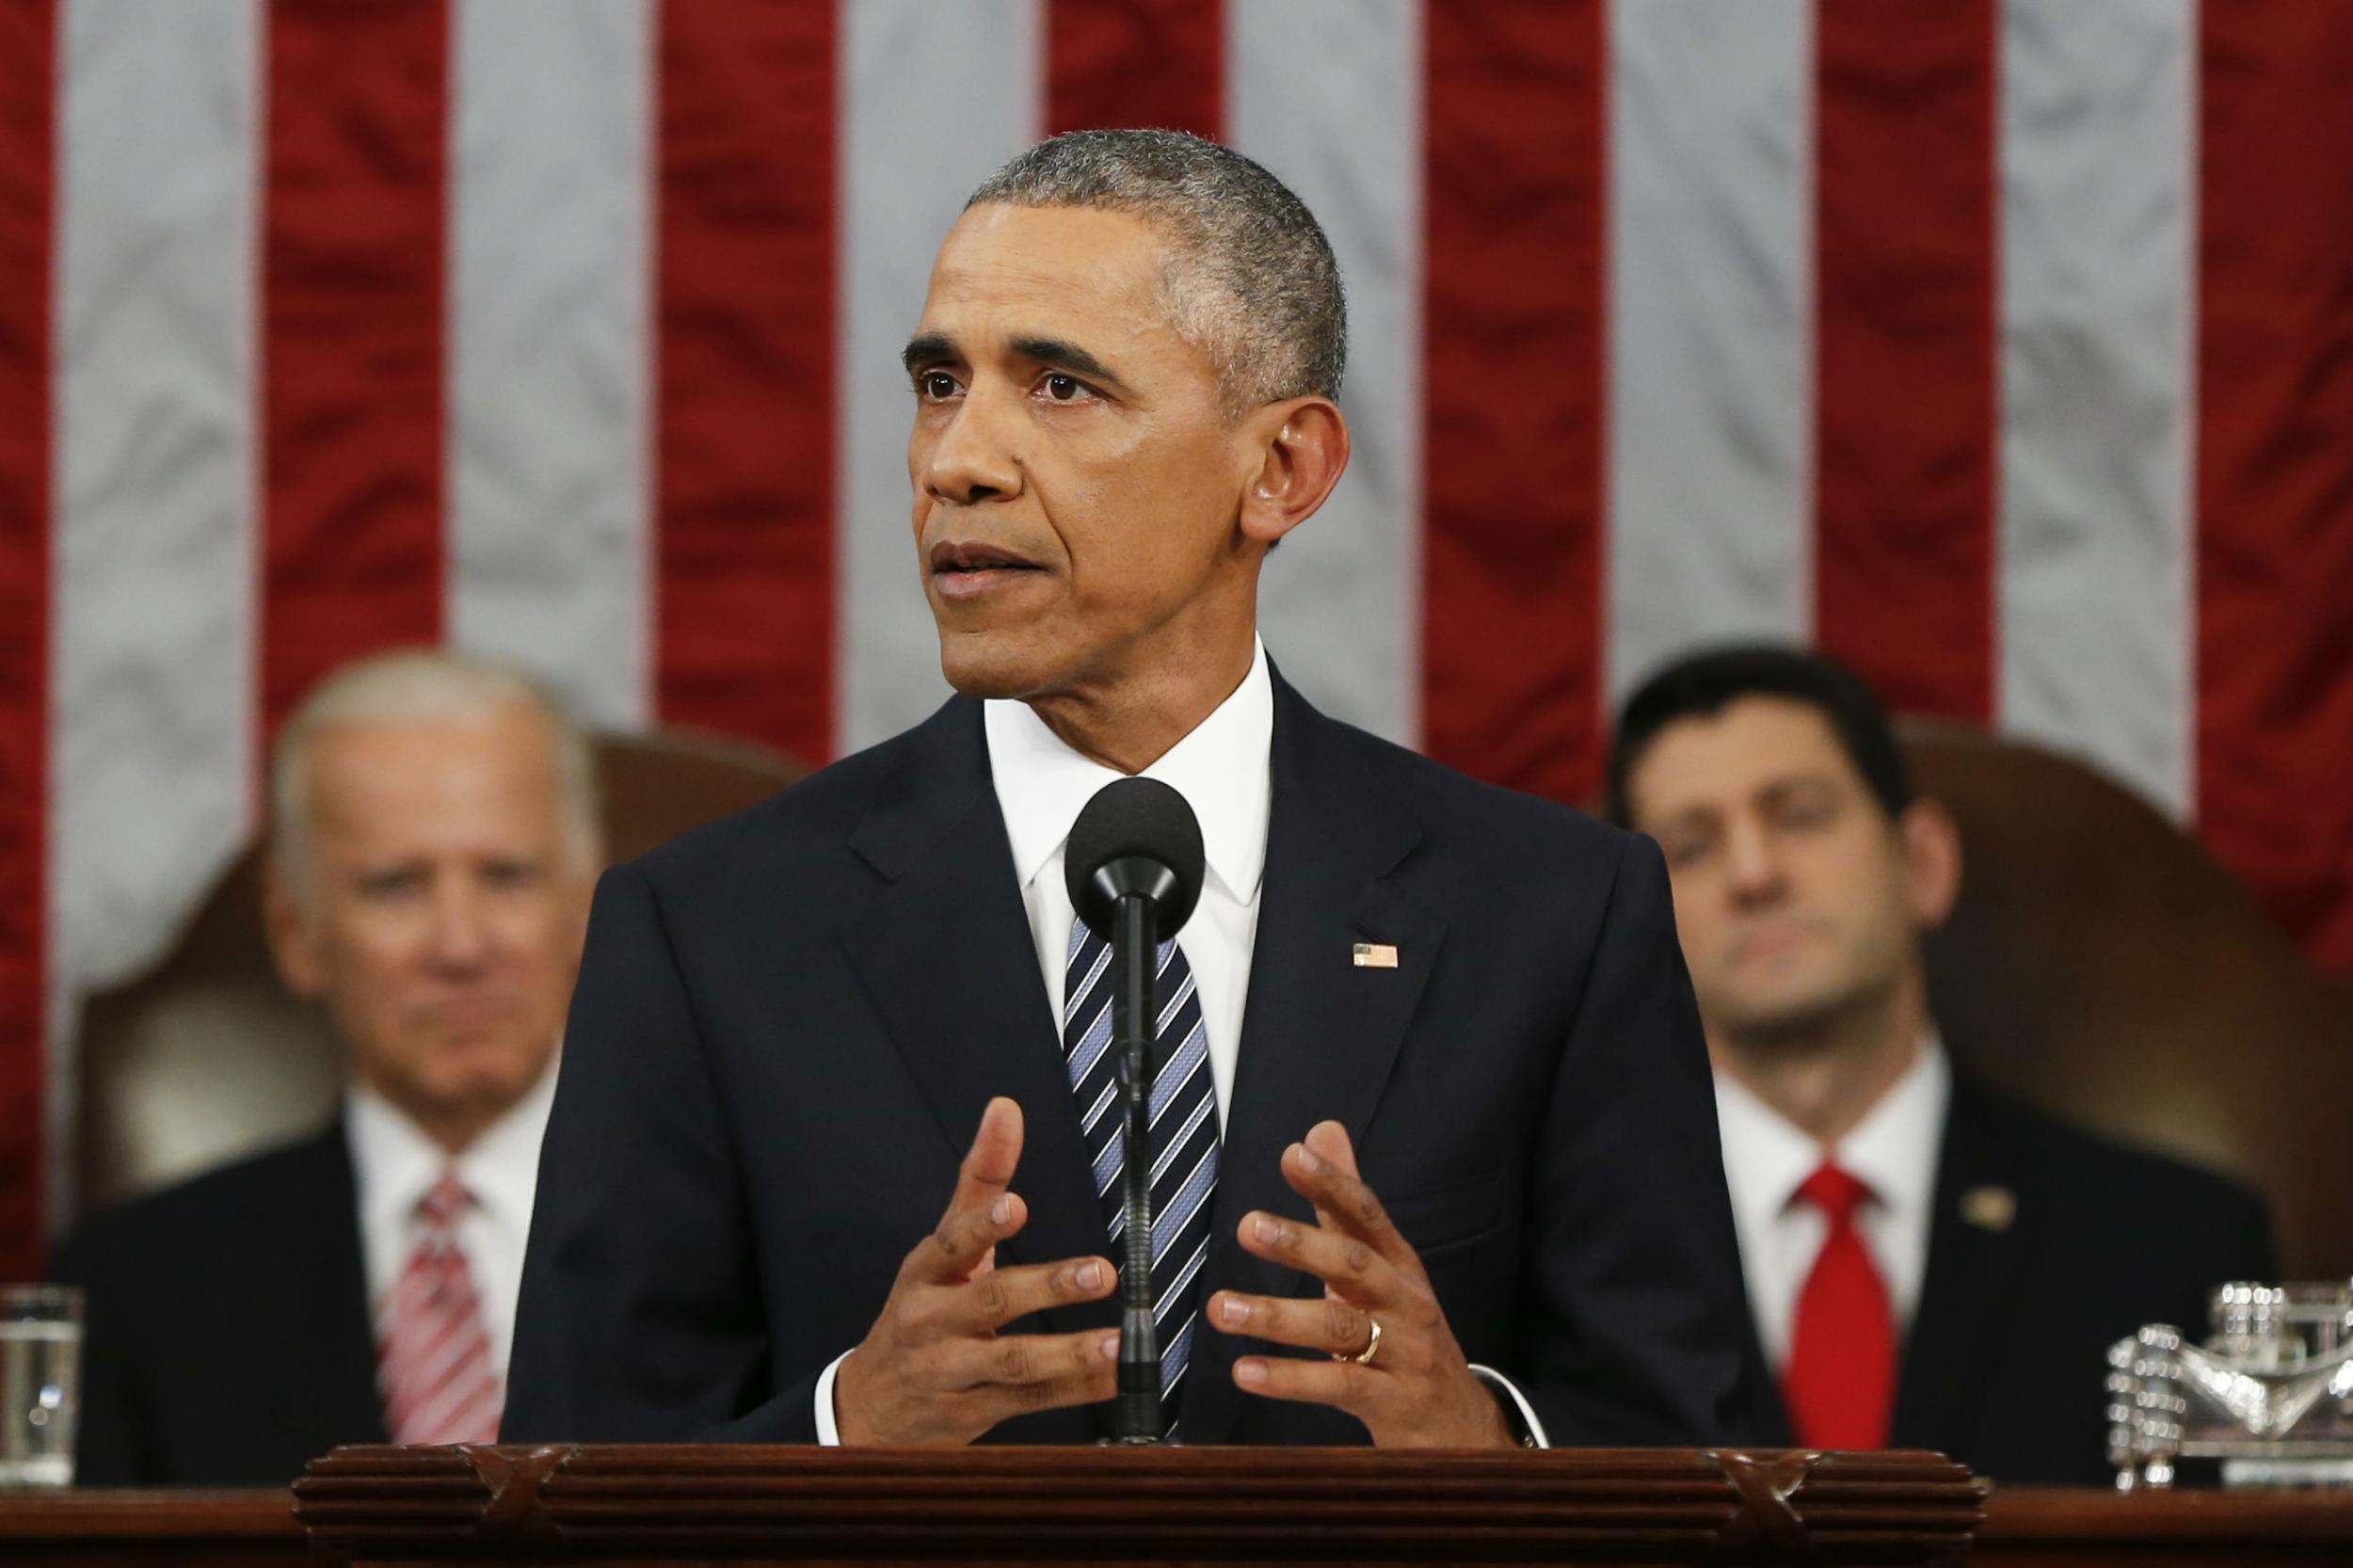 Mr Obama delivered his final State of the Union address